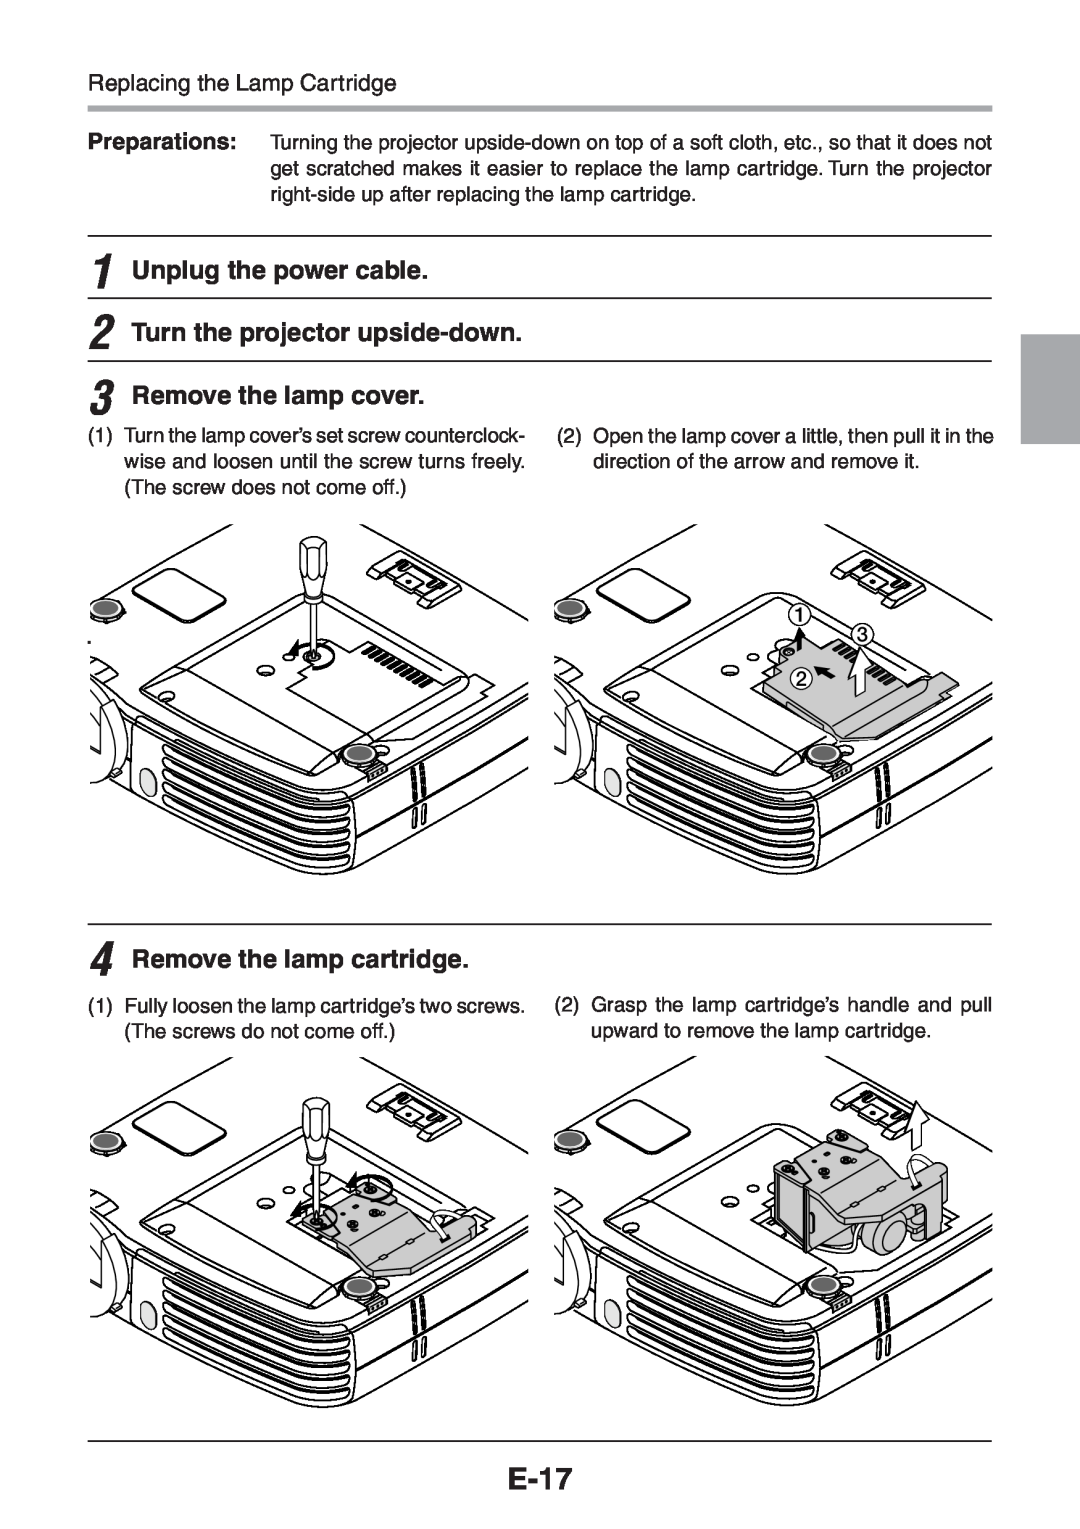 3M PX5 E-17, Unplug the power cable 2 Turn the projector upside-down, Remove the lamp cover, Remove the lamp cartridge 